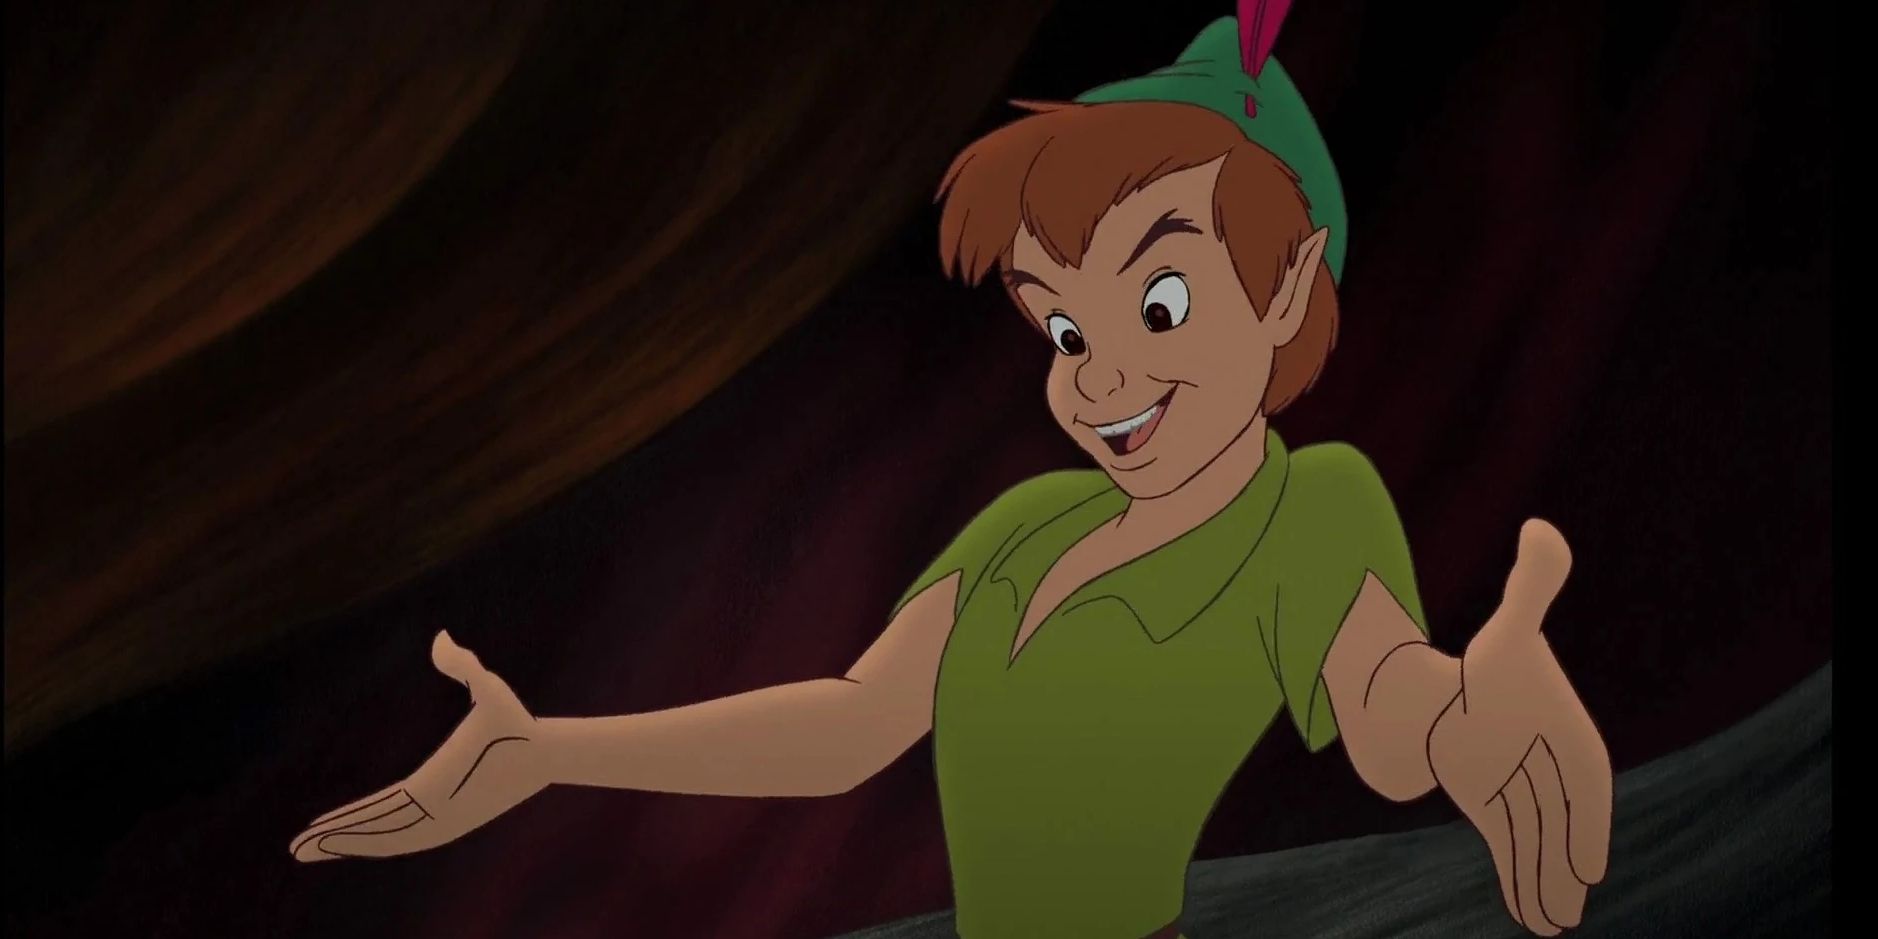 Peter Pan, arms outstretched and smiling in the animated film.